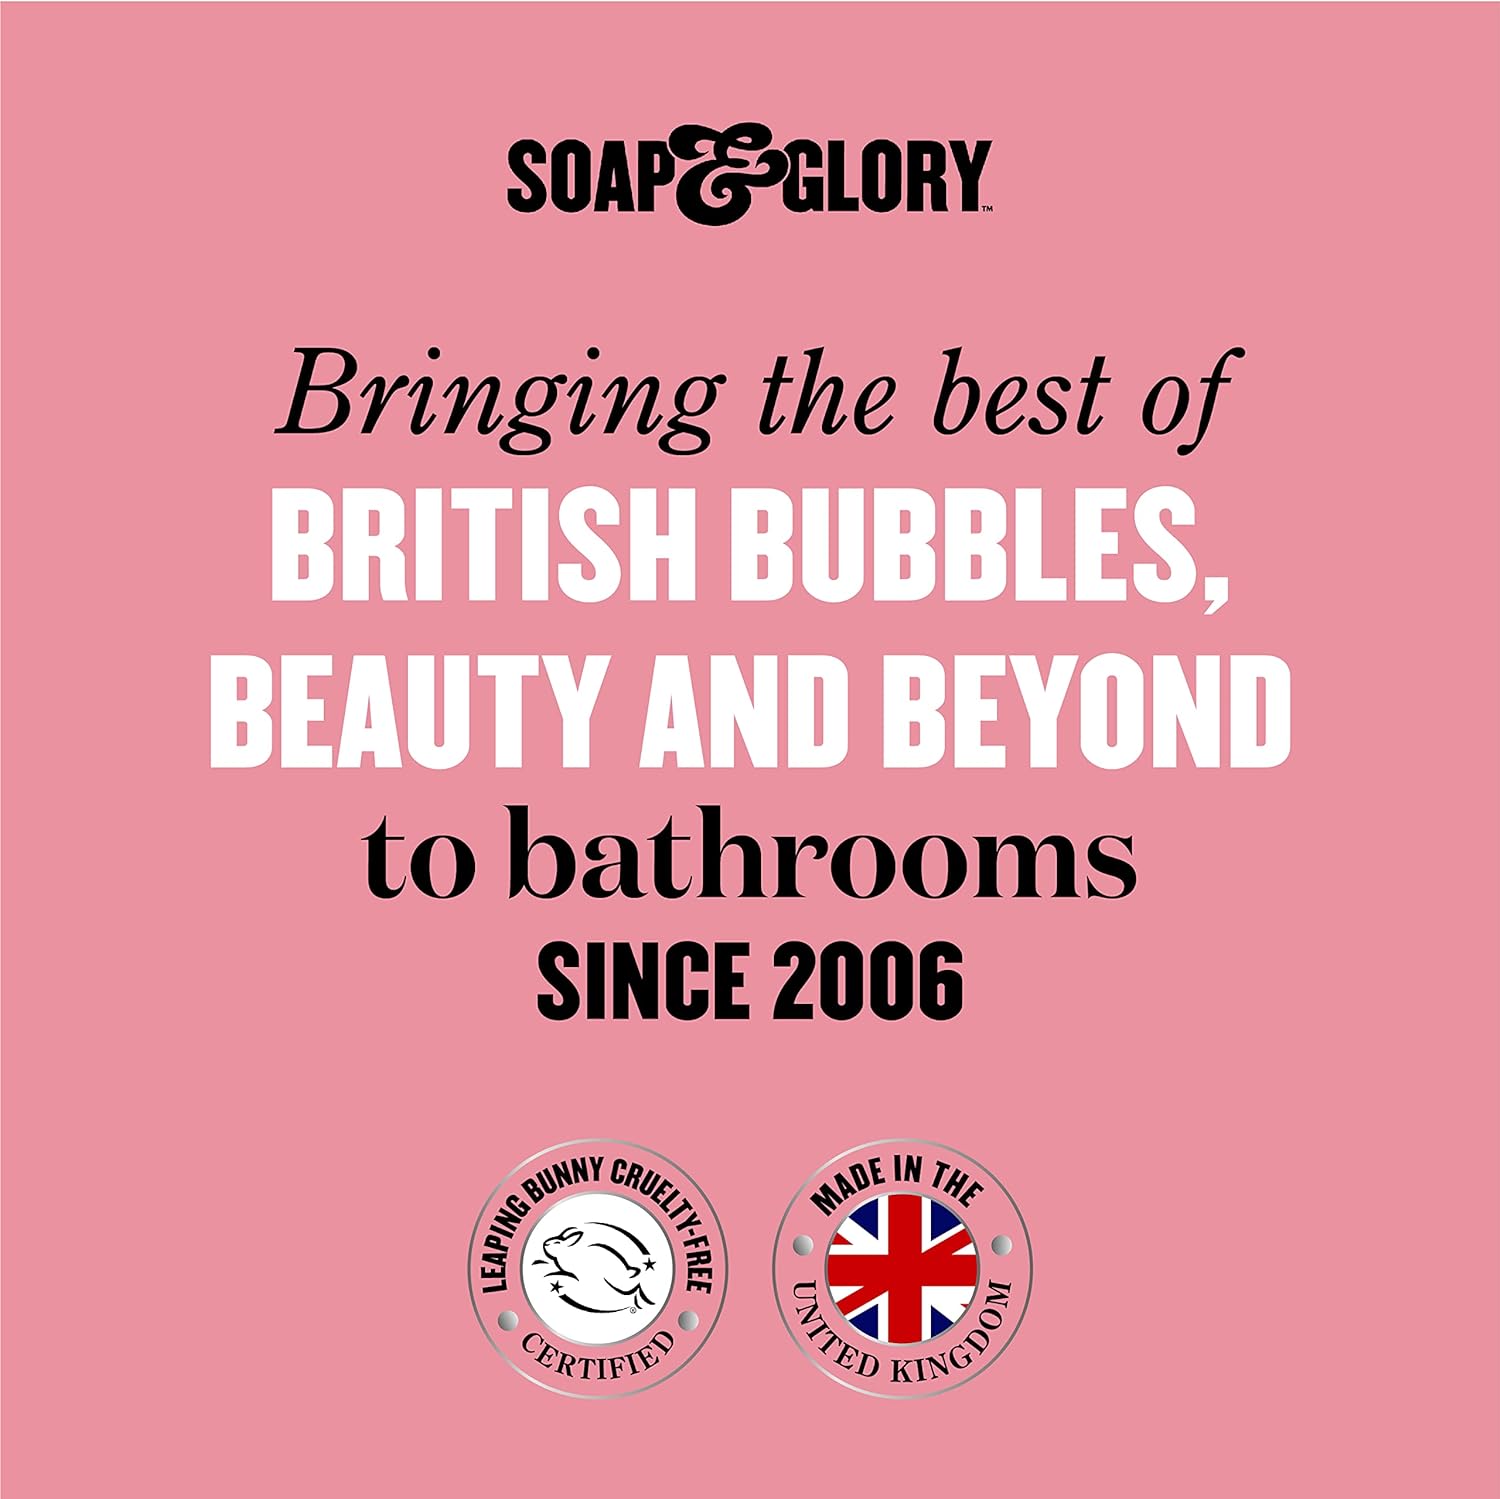 Soap & Glory All The Right Smoothes In-Shower Moisturizer - Lock In Lasting Hydration with our Avocado Oil, Vitamin E & Vitamin C Body Moisturizer - Citrus Scent Body Lotion for Use In Shower (250ml) : Beauty & Personal Care